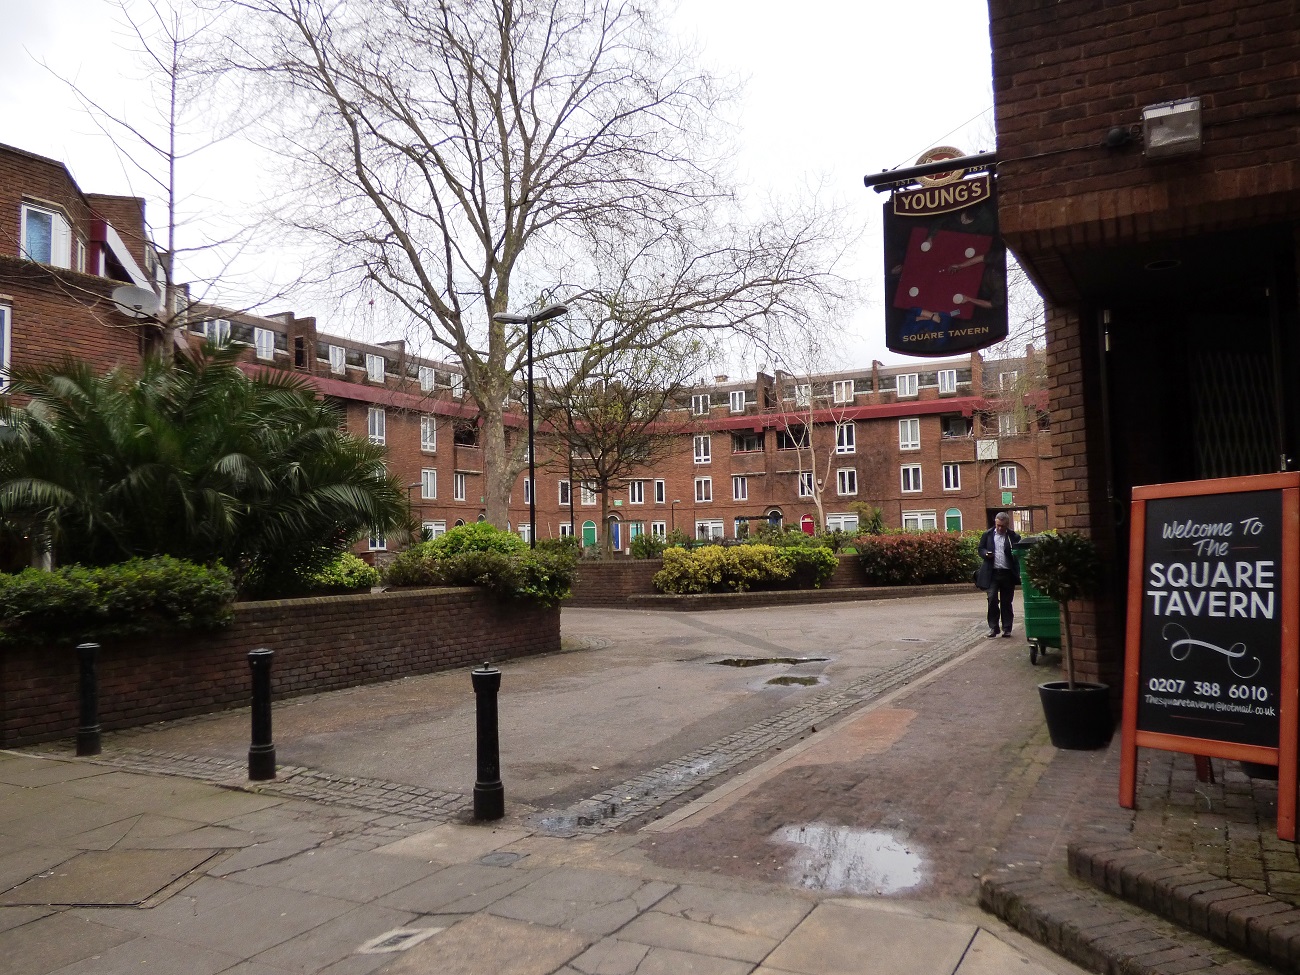 20170323_Camden_Tolmers-Square_Welcome